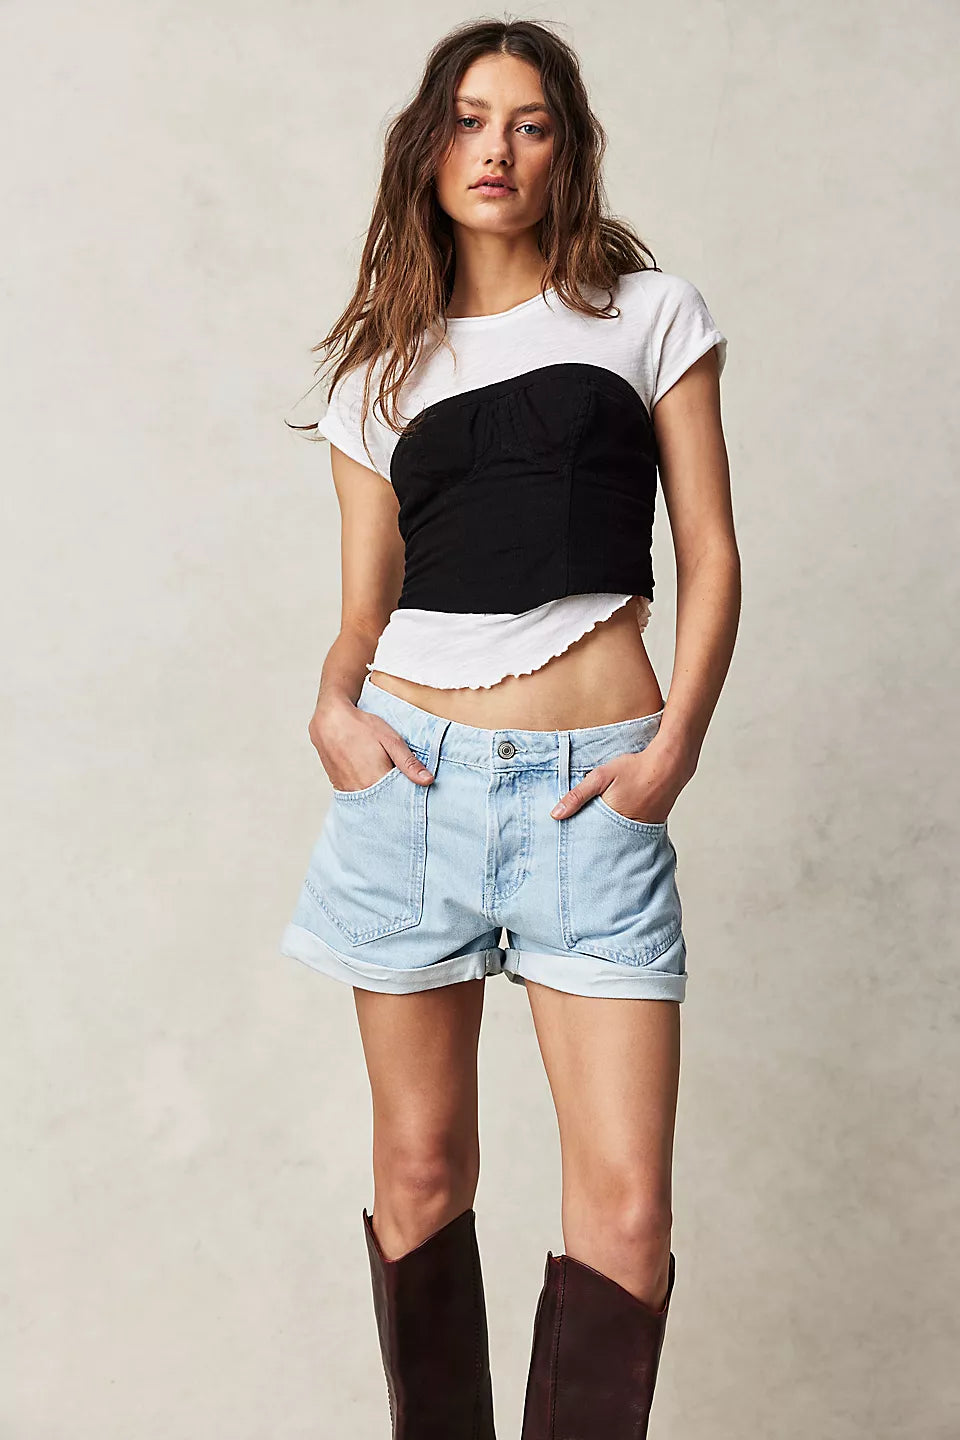 Beginner's Luck Slouch Shorts - Rookie Wash